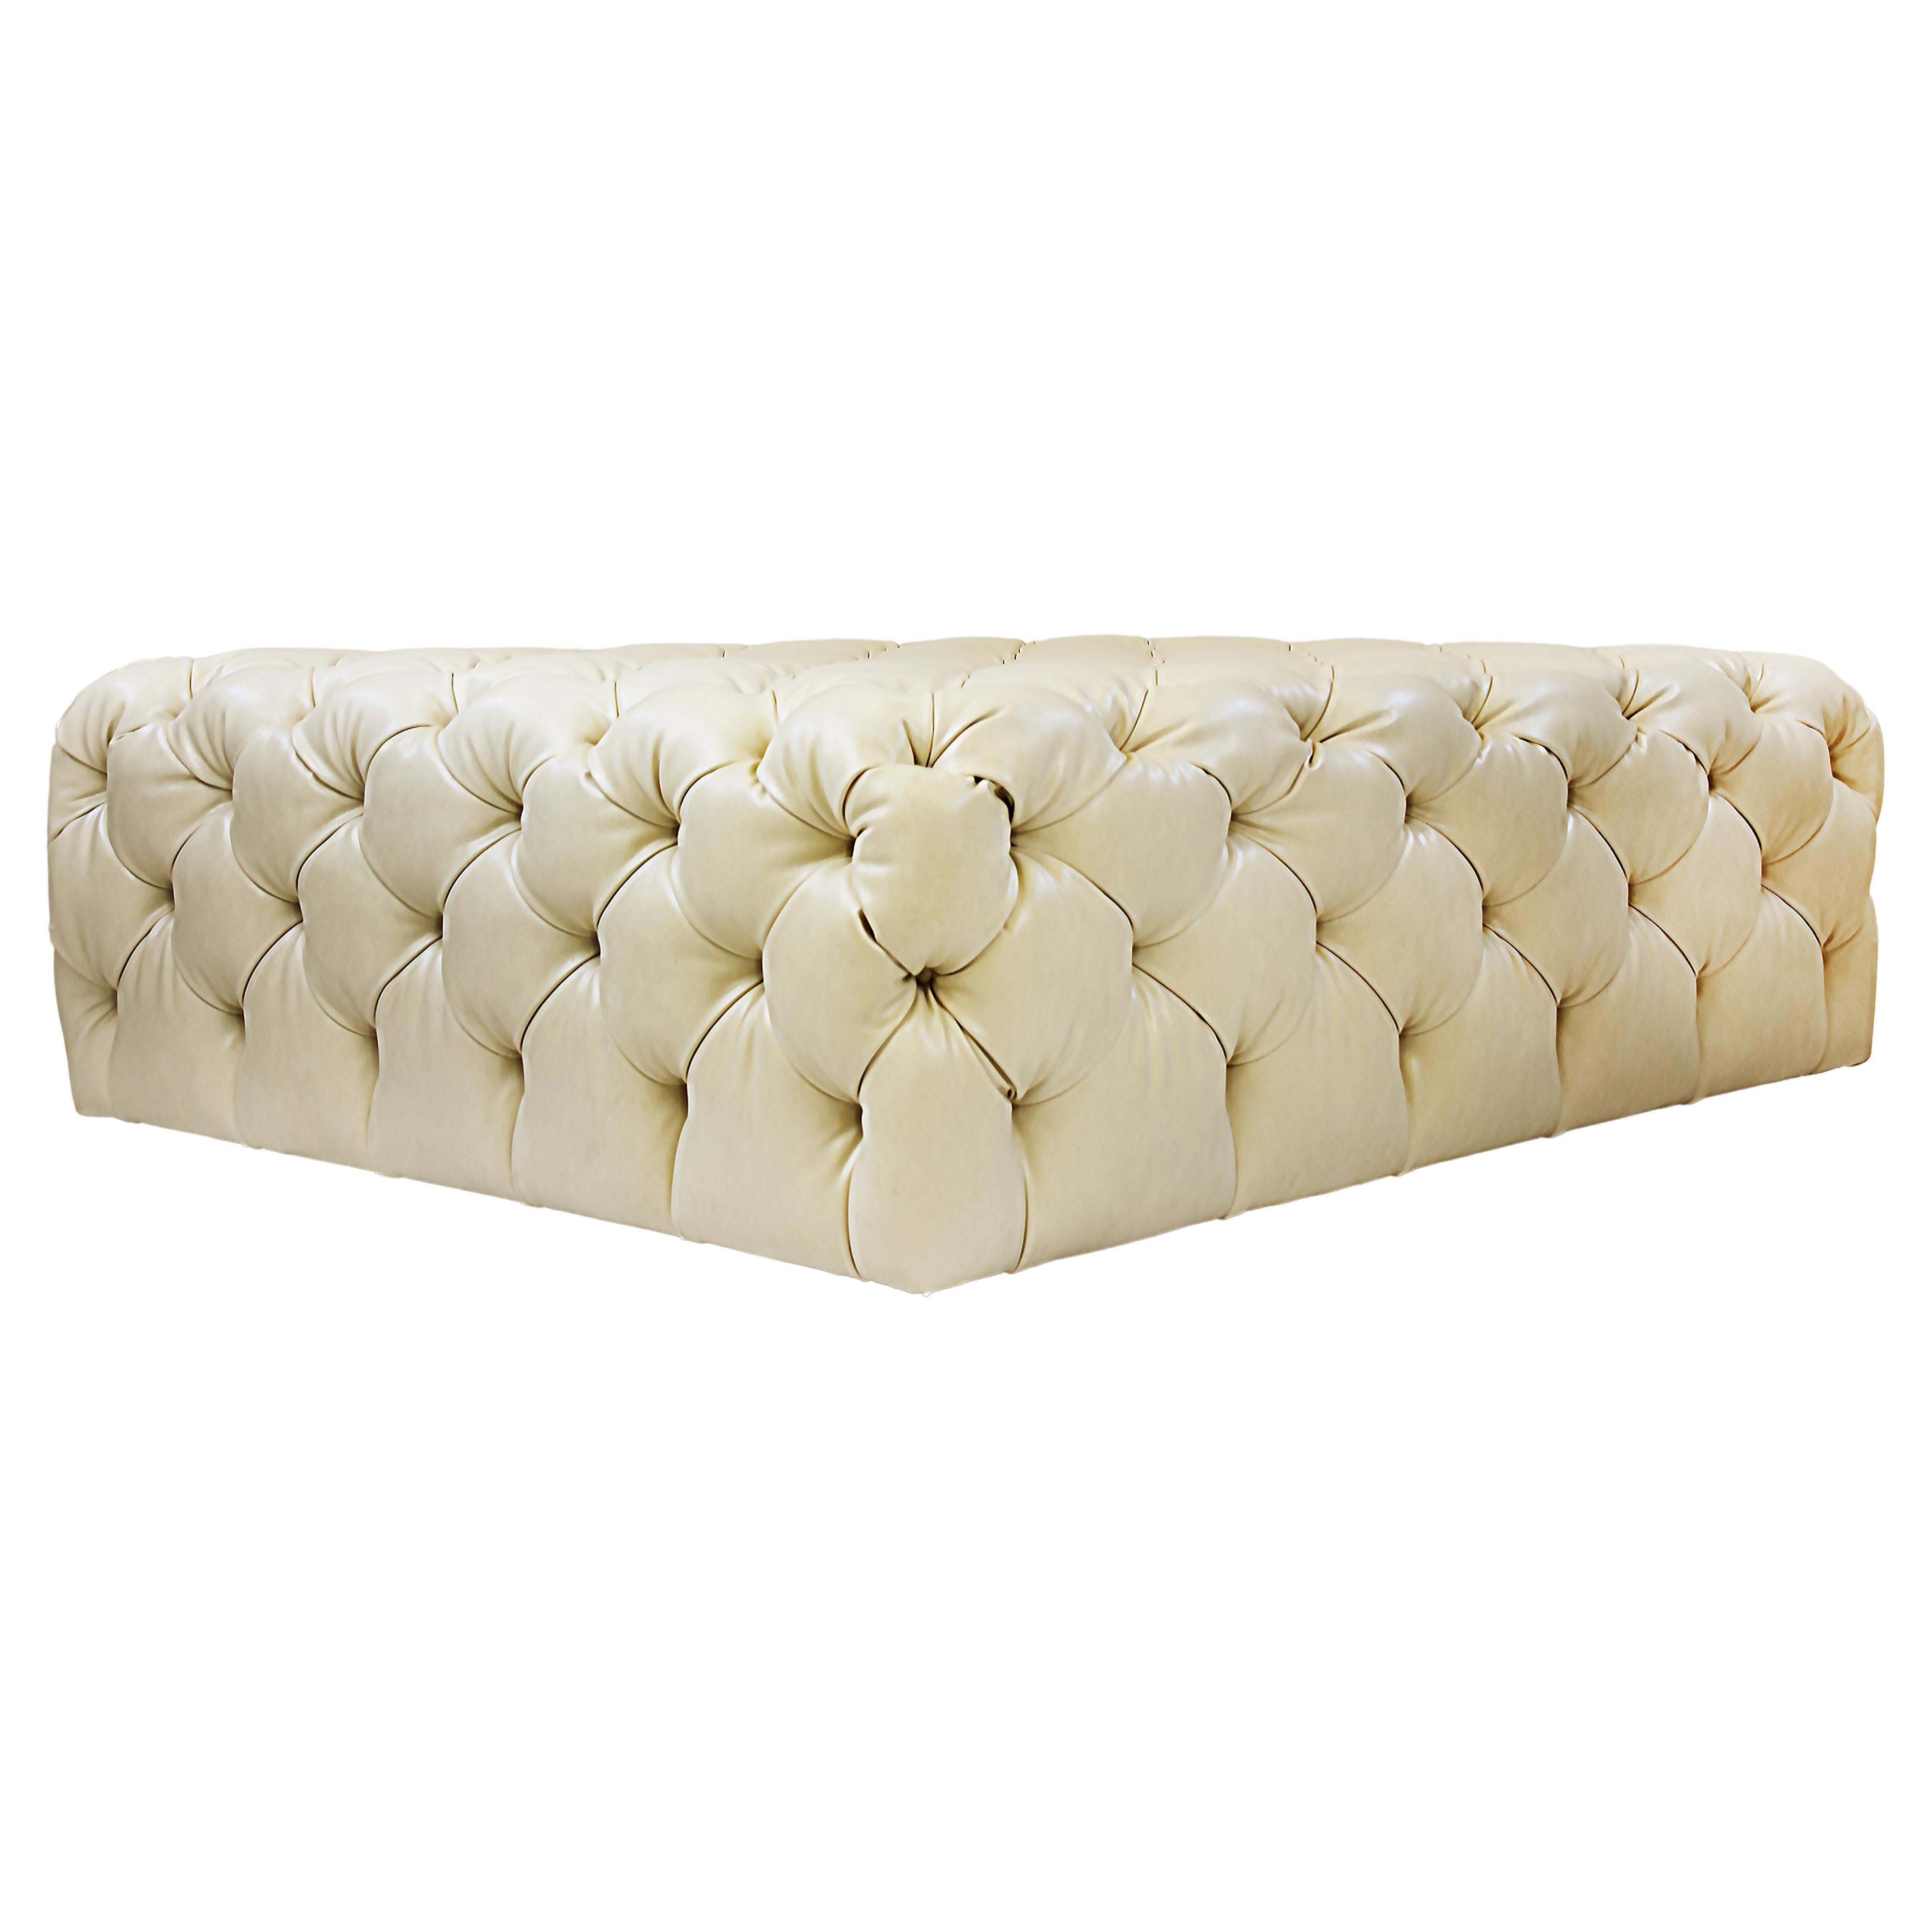 Le Jeune Upholstery Bristol Tufted Leather Coffee Table  Floor Model For Sale